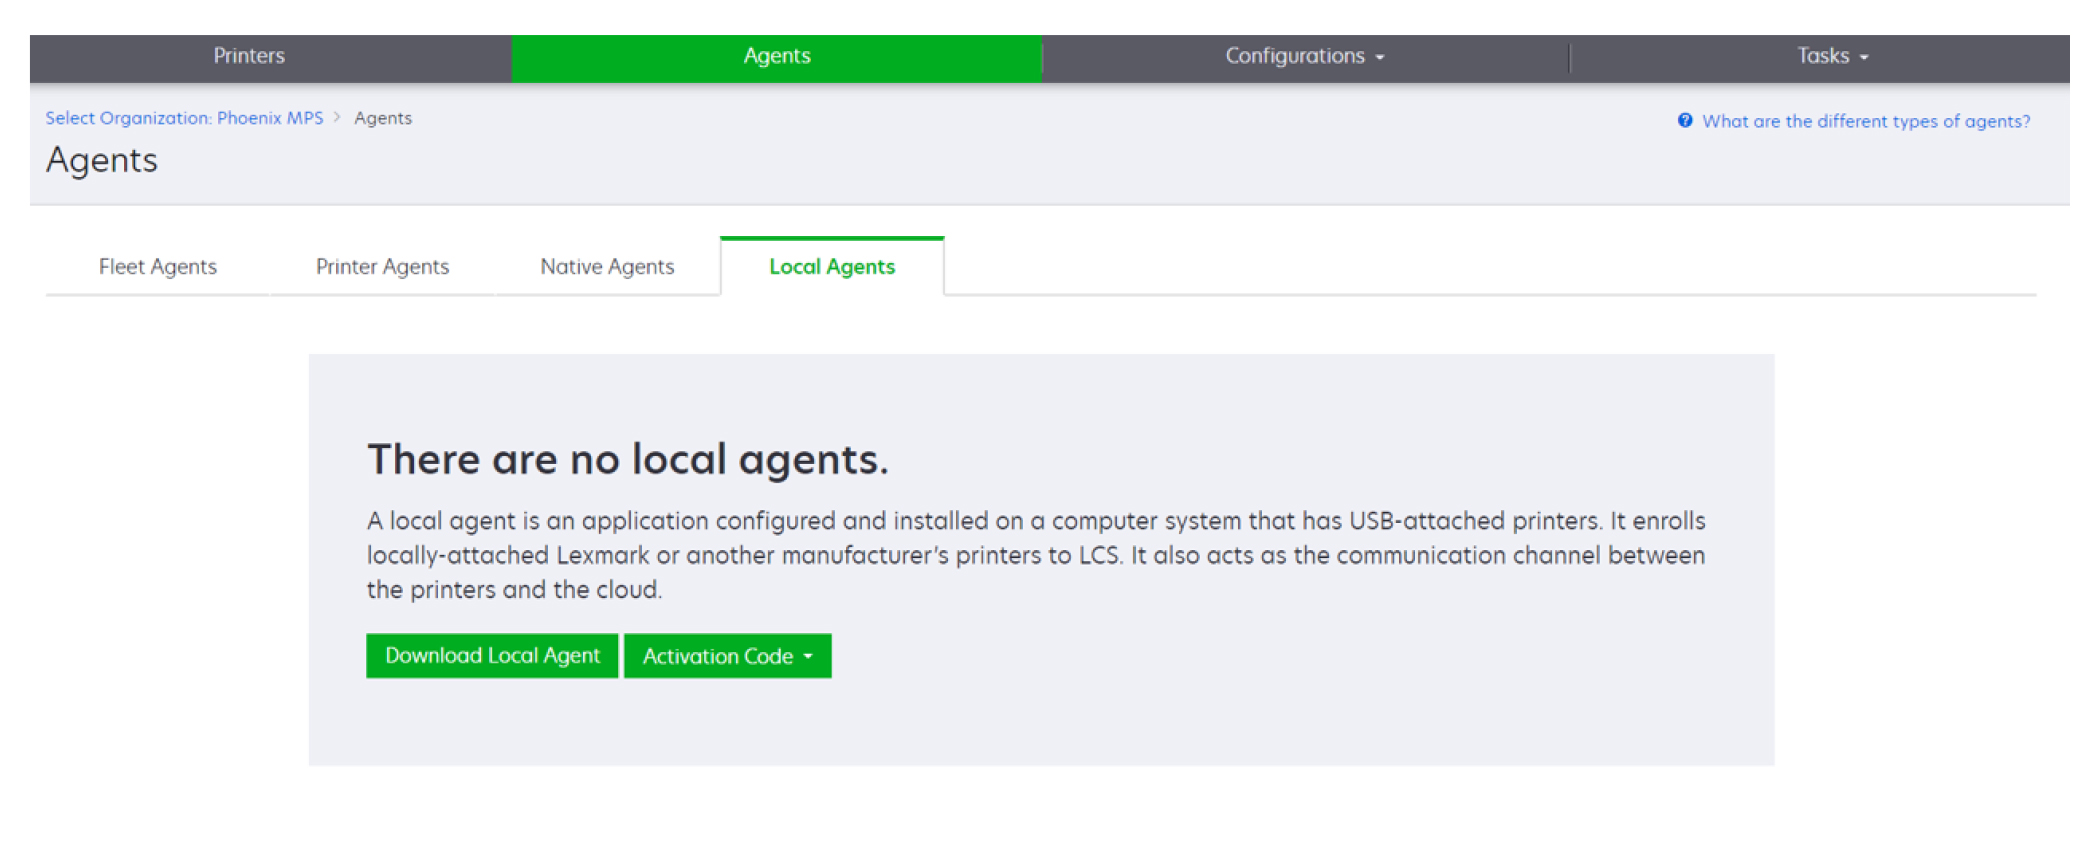 A screenshot showing the Download Agent option when no local agent is registered.